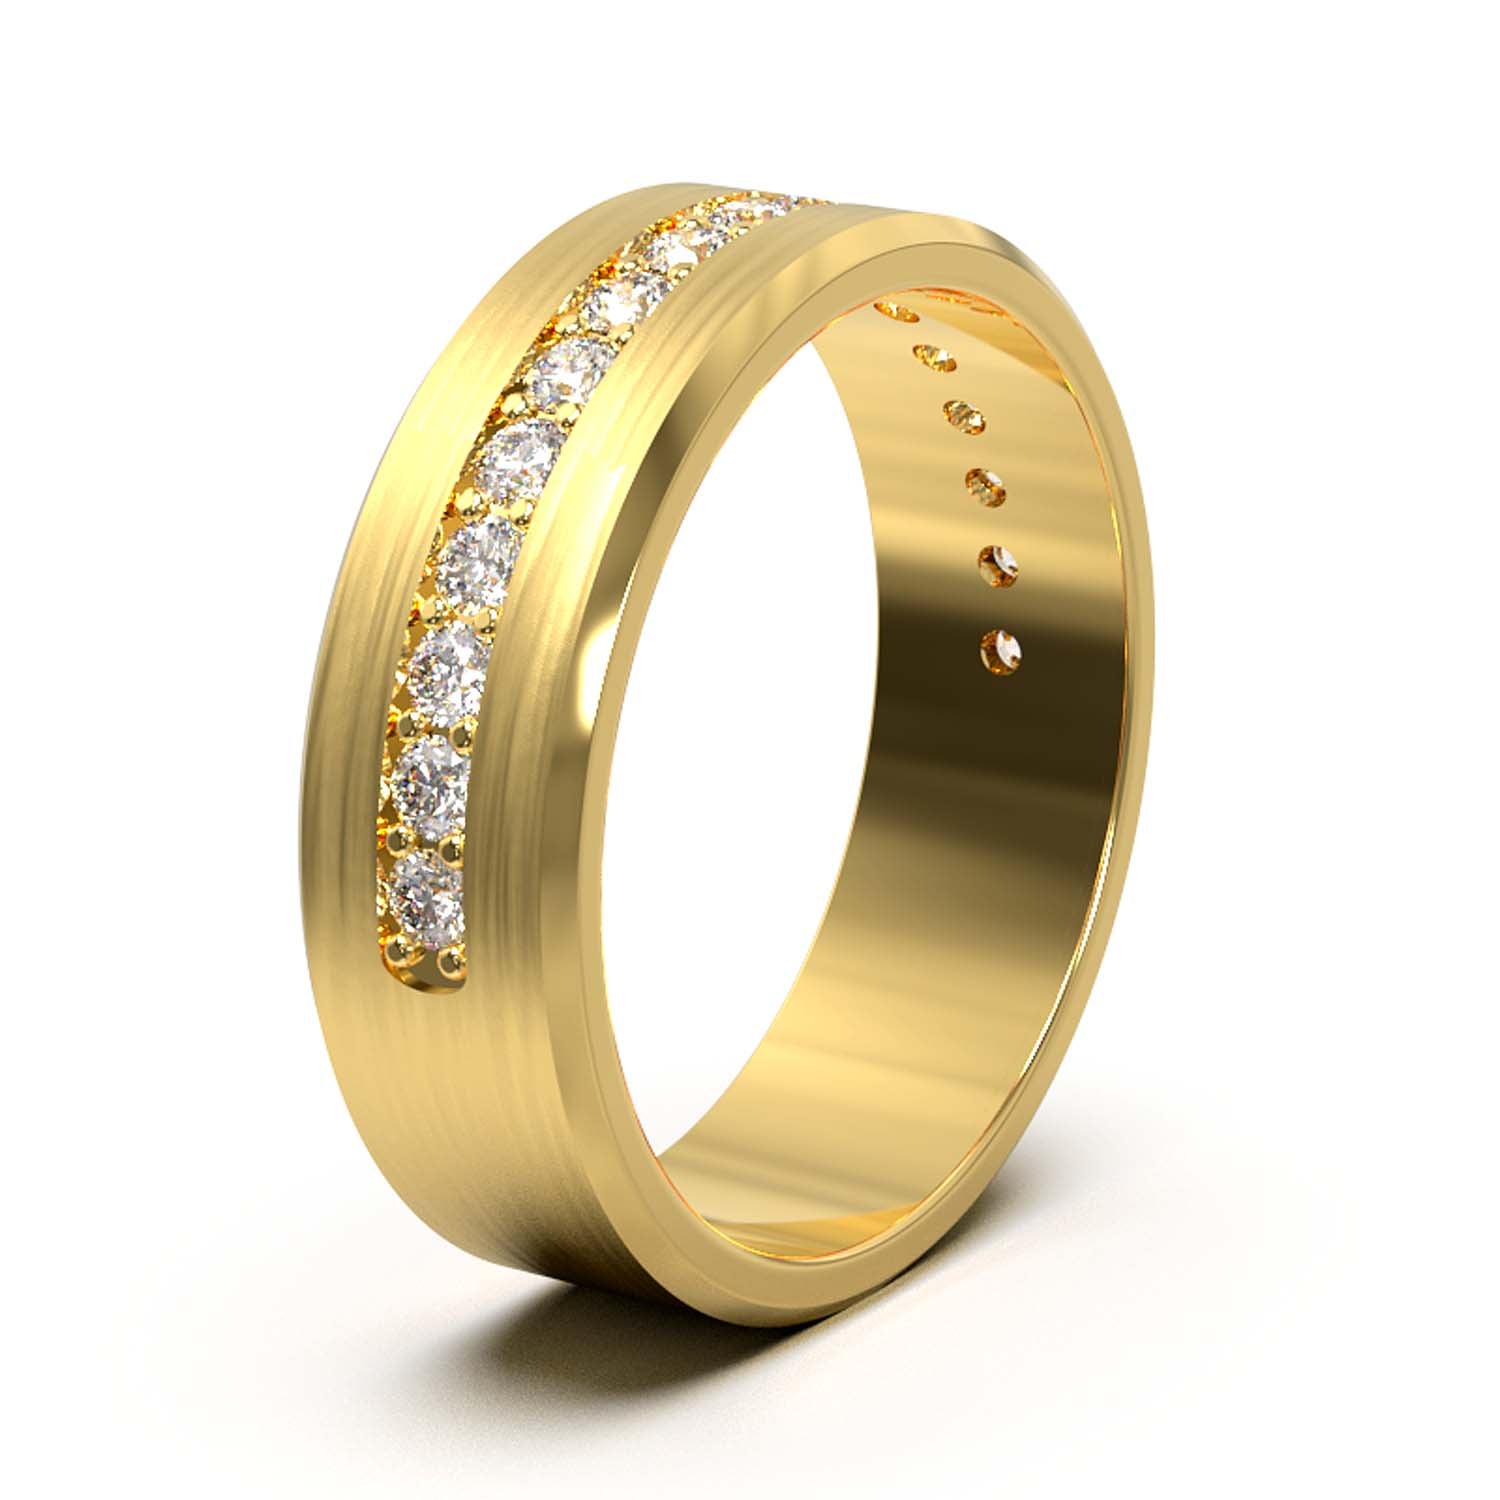 Elegant Unisex 6.5 mm Wedding Band with Channel-Set Lab-Grown Diamonds, Brushed & Polished Finishes in Varied Precious Metals